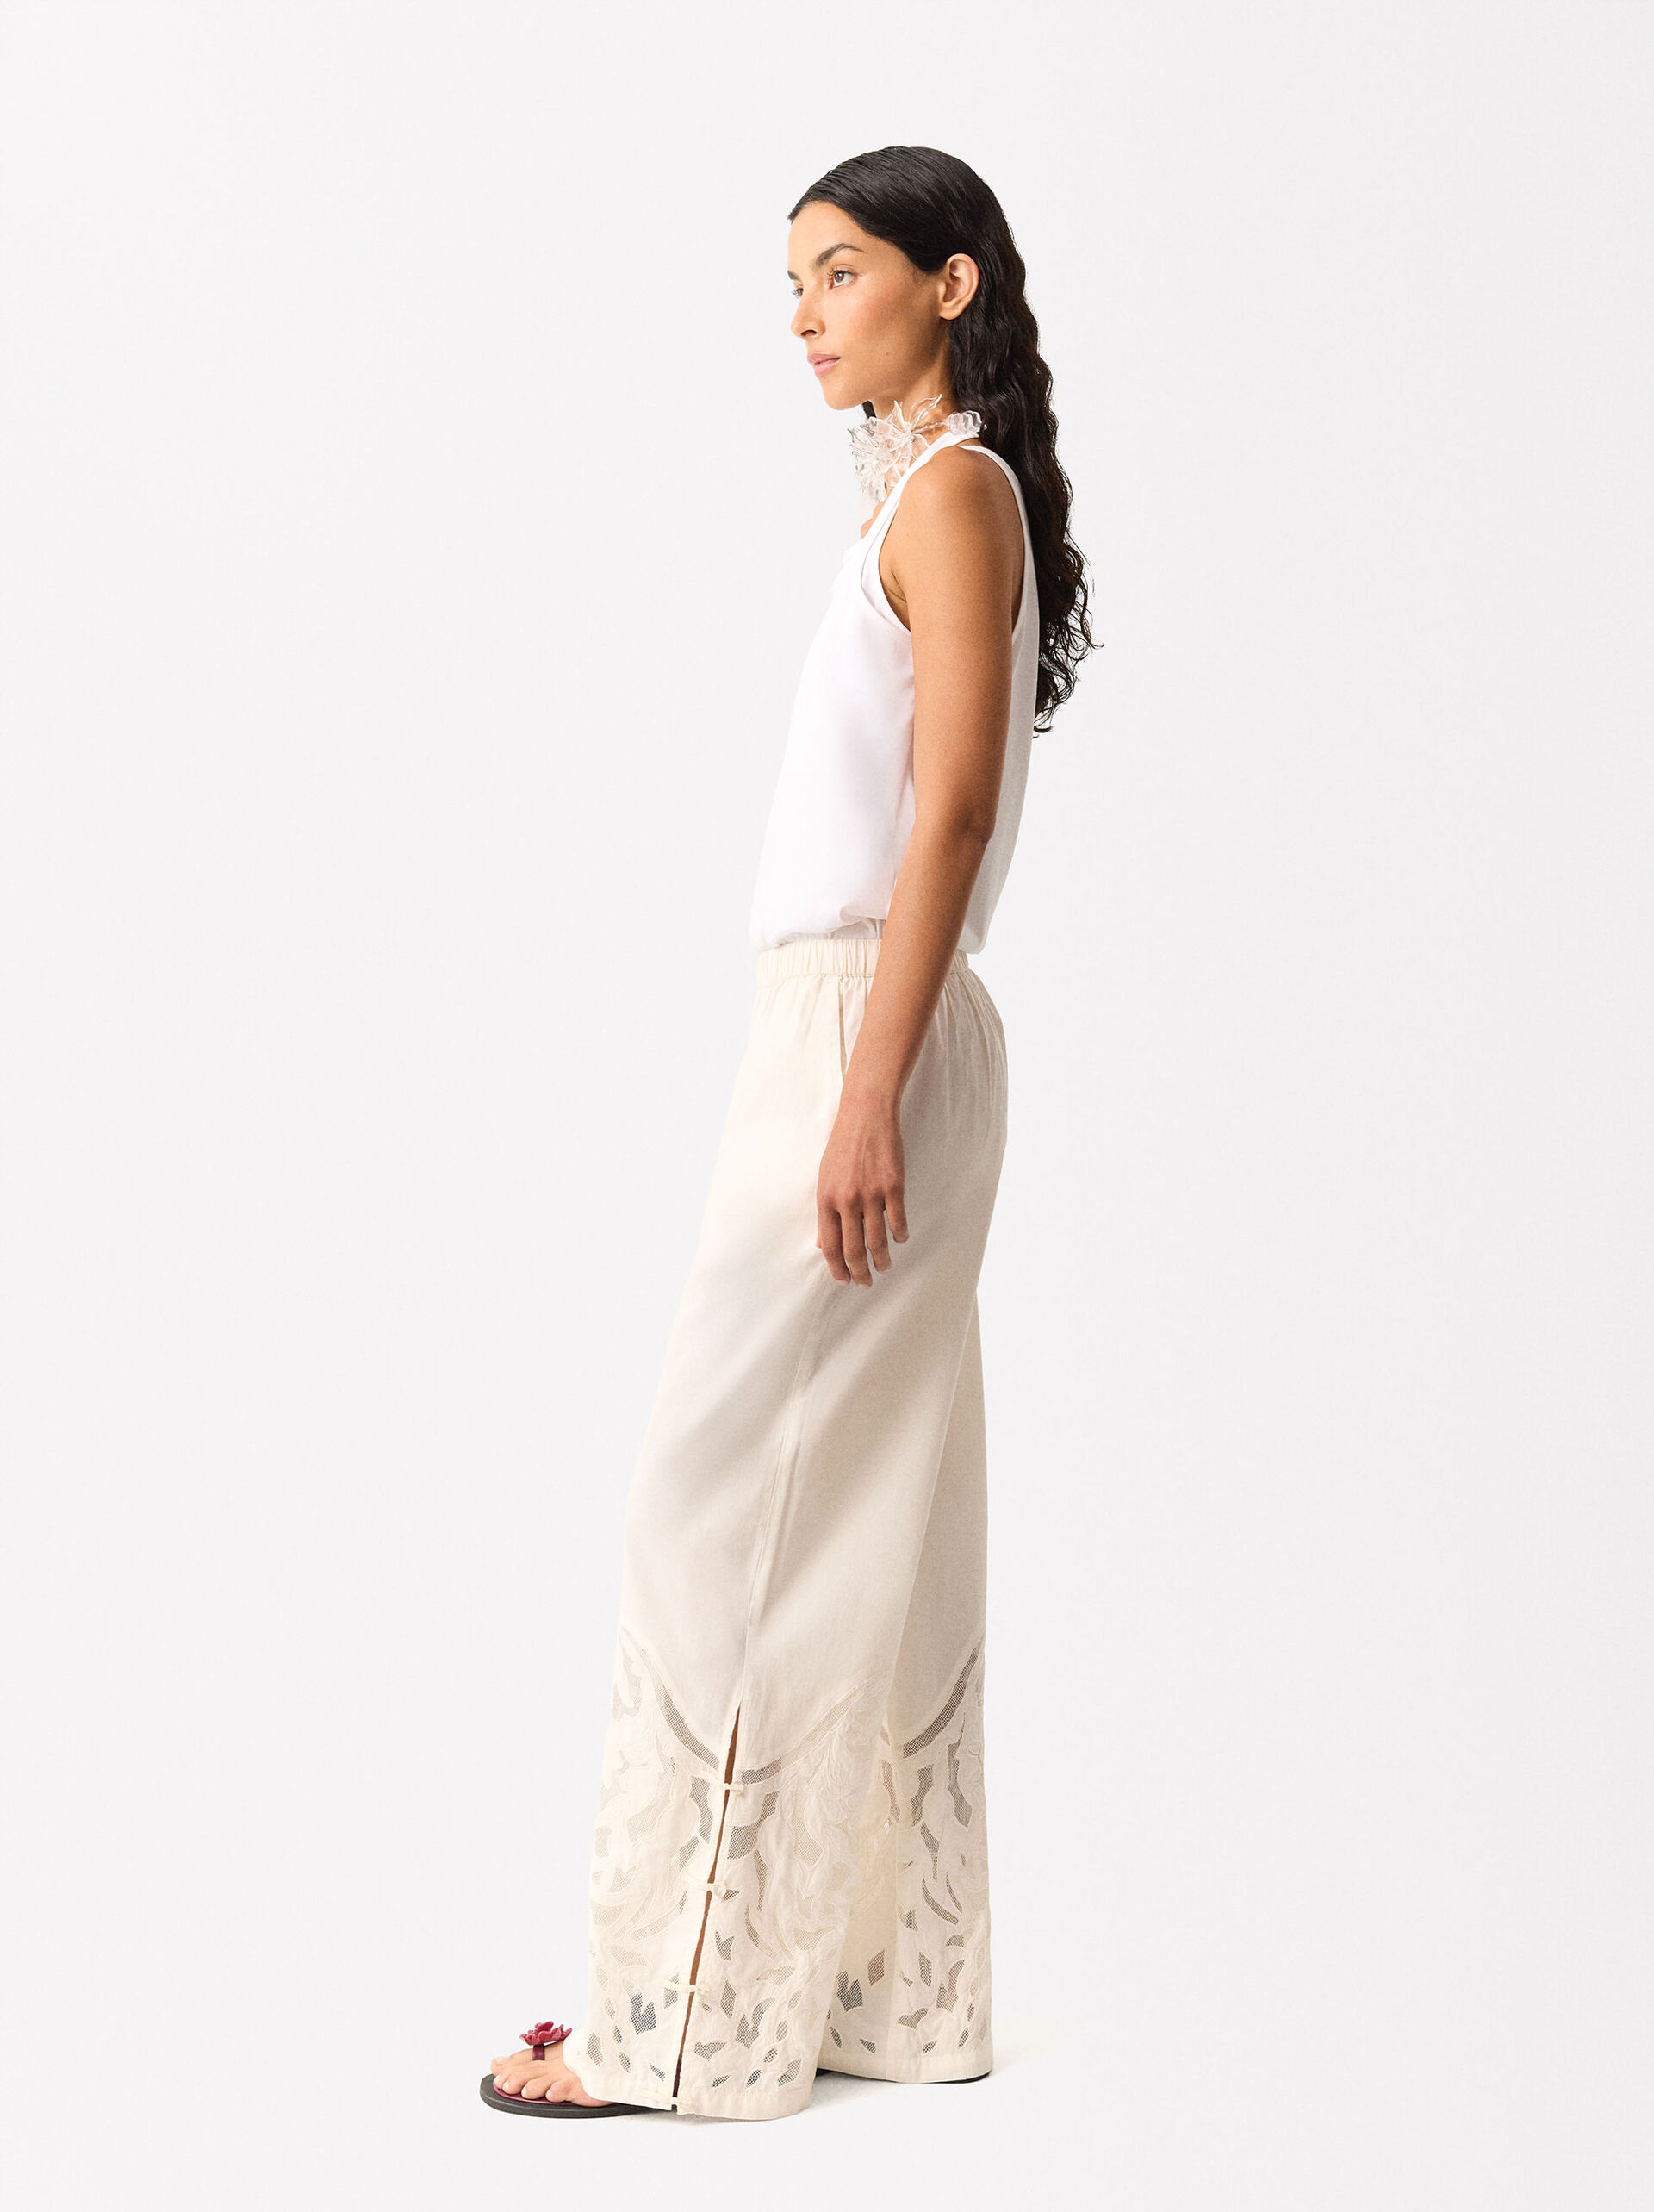 Online Exclusive - Embroidered Cotton Pants image number 5.0